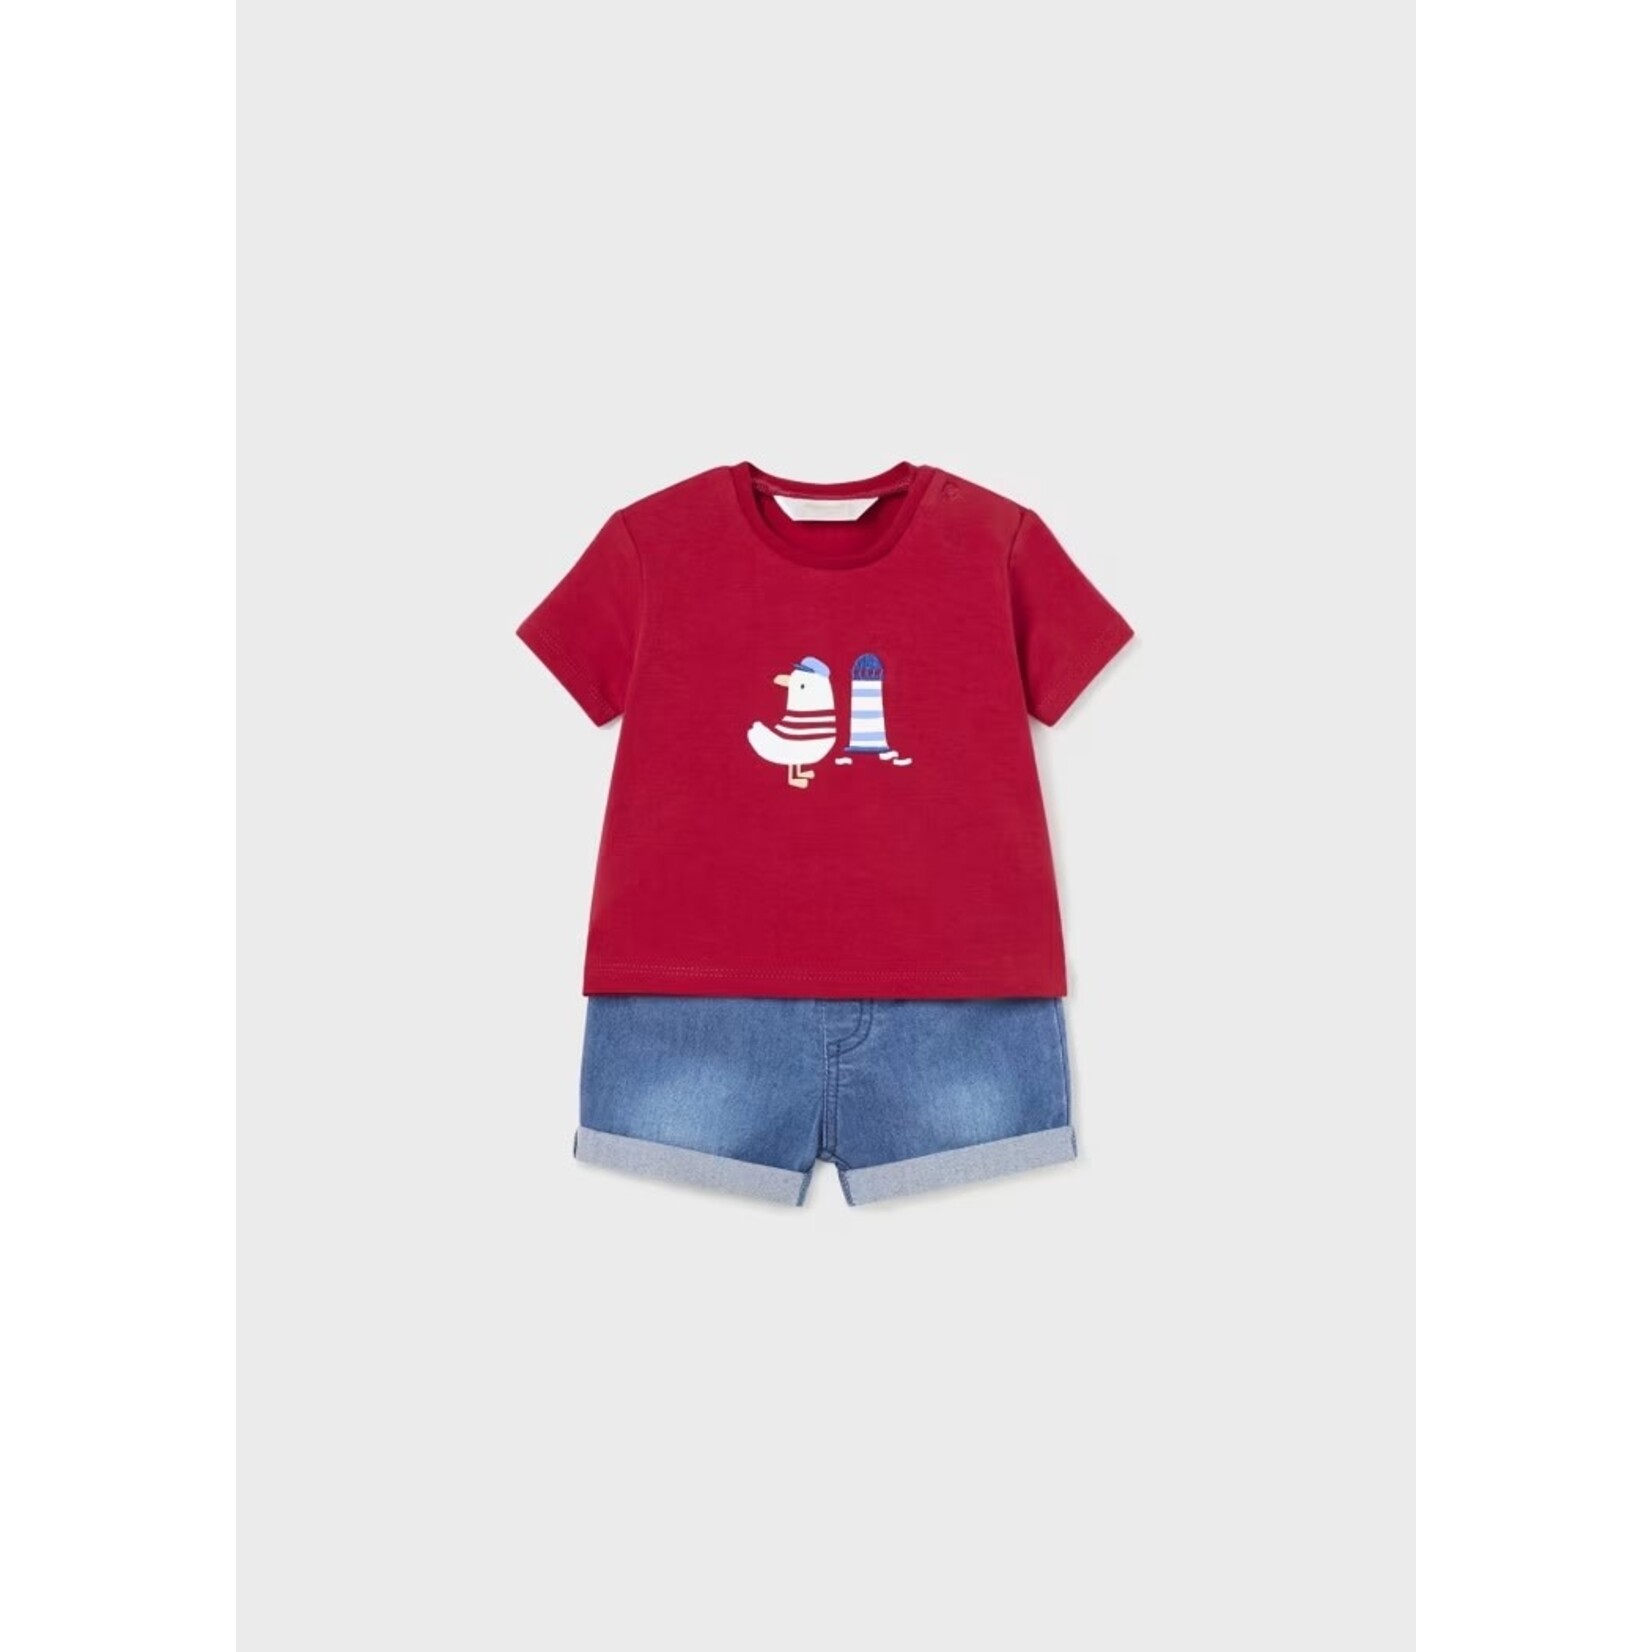 Mayoral MAYORAL - Two-Piece Set - Red T-Shirt with Sea Bird Print and Soft Denim Shorts